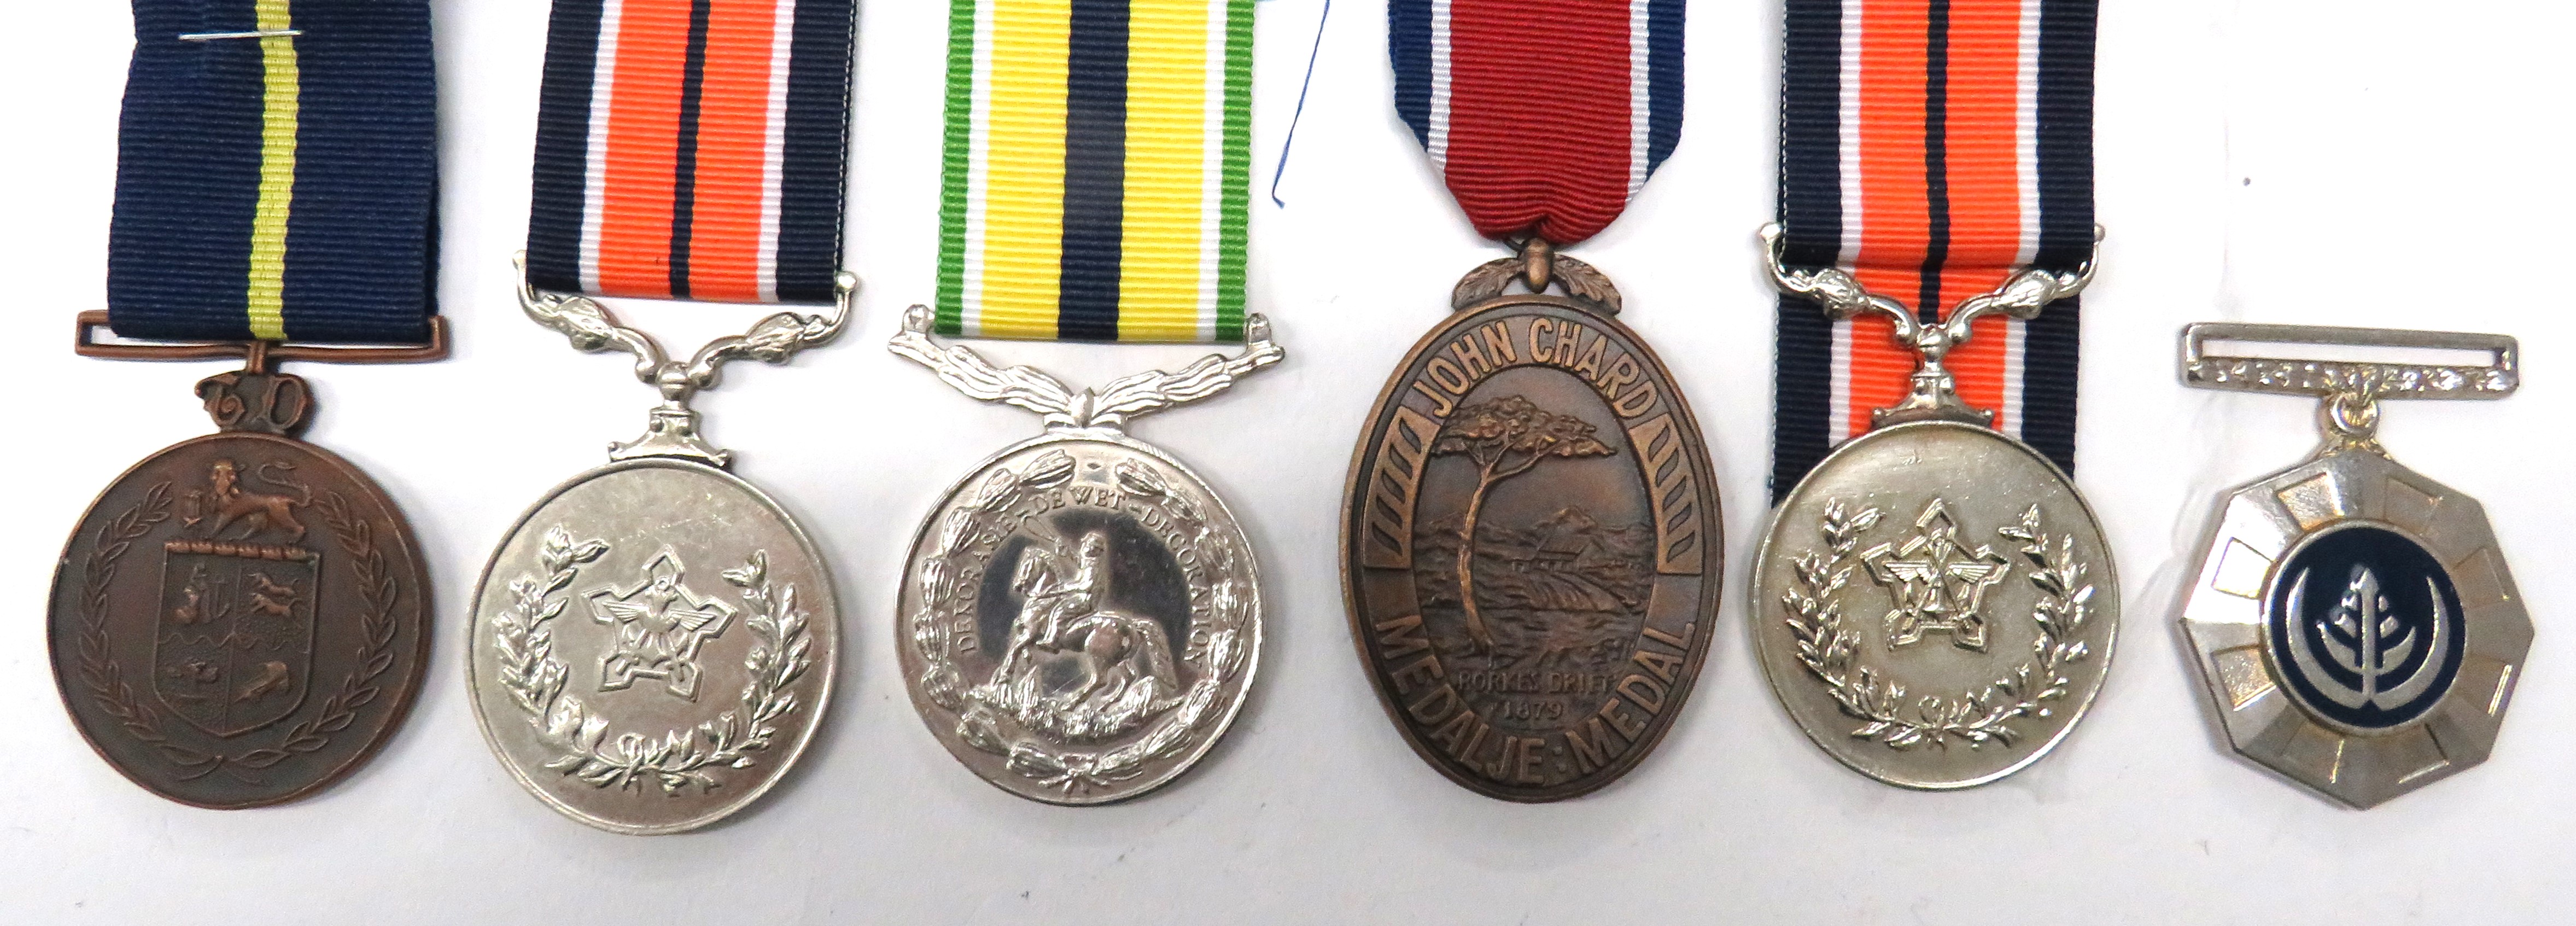 6 x Various South Africa Medals consisting Pro Patria medal numbered "317869" ... John Chard